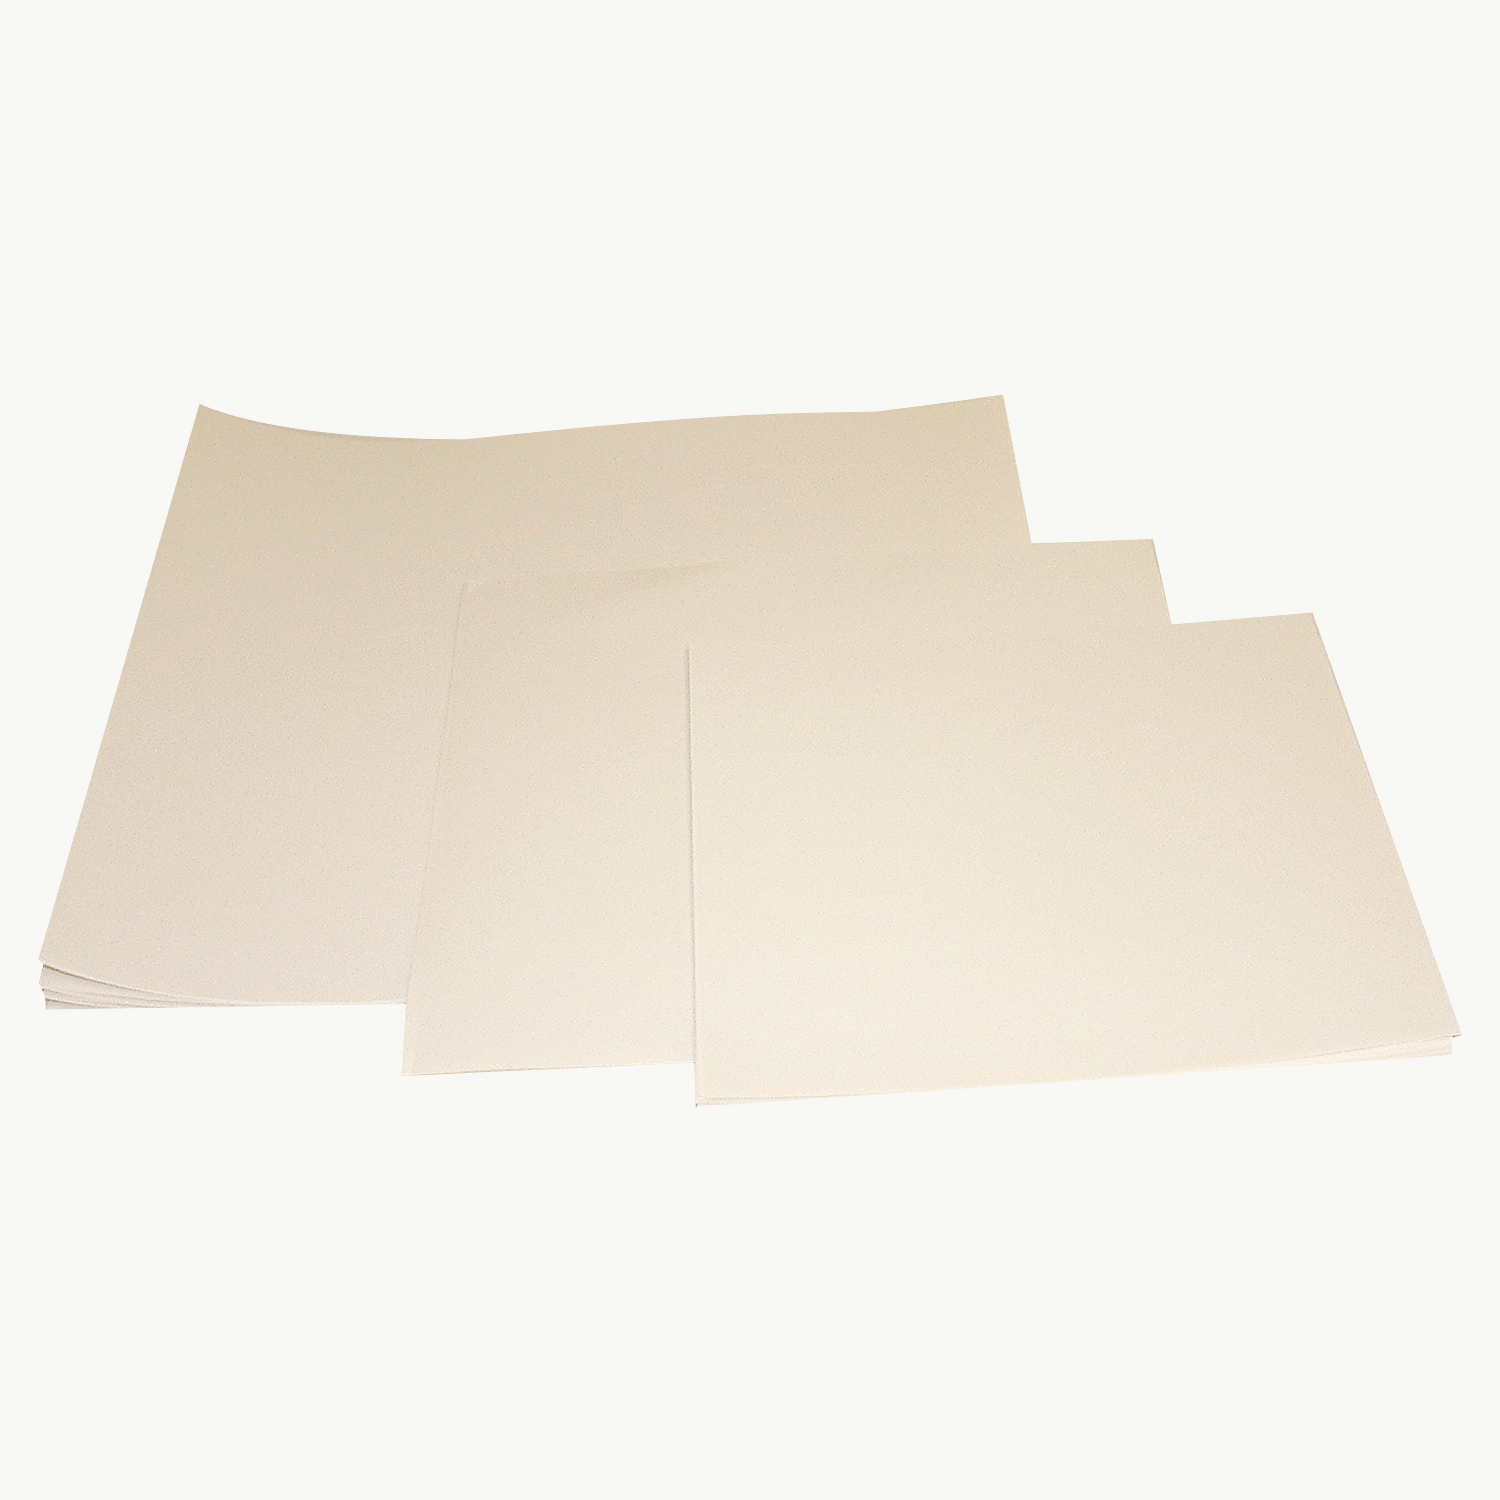 JVCC SCP-04 Silicone-Coated Paper Separator Sheets